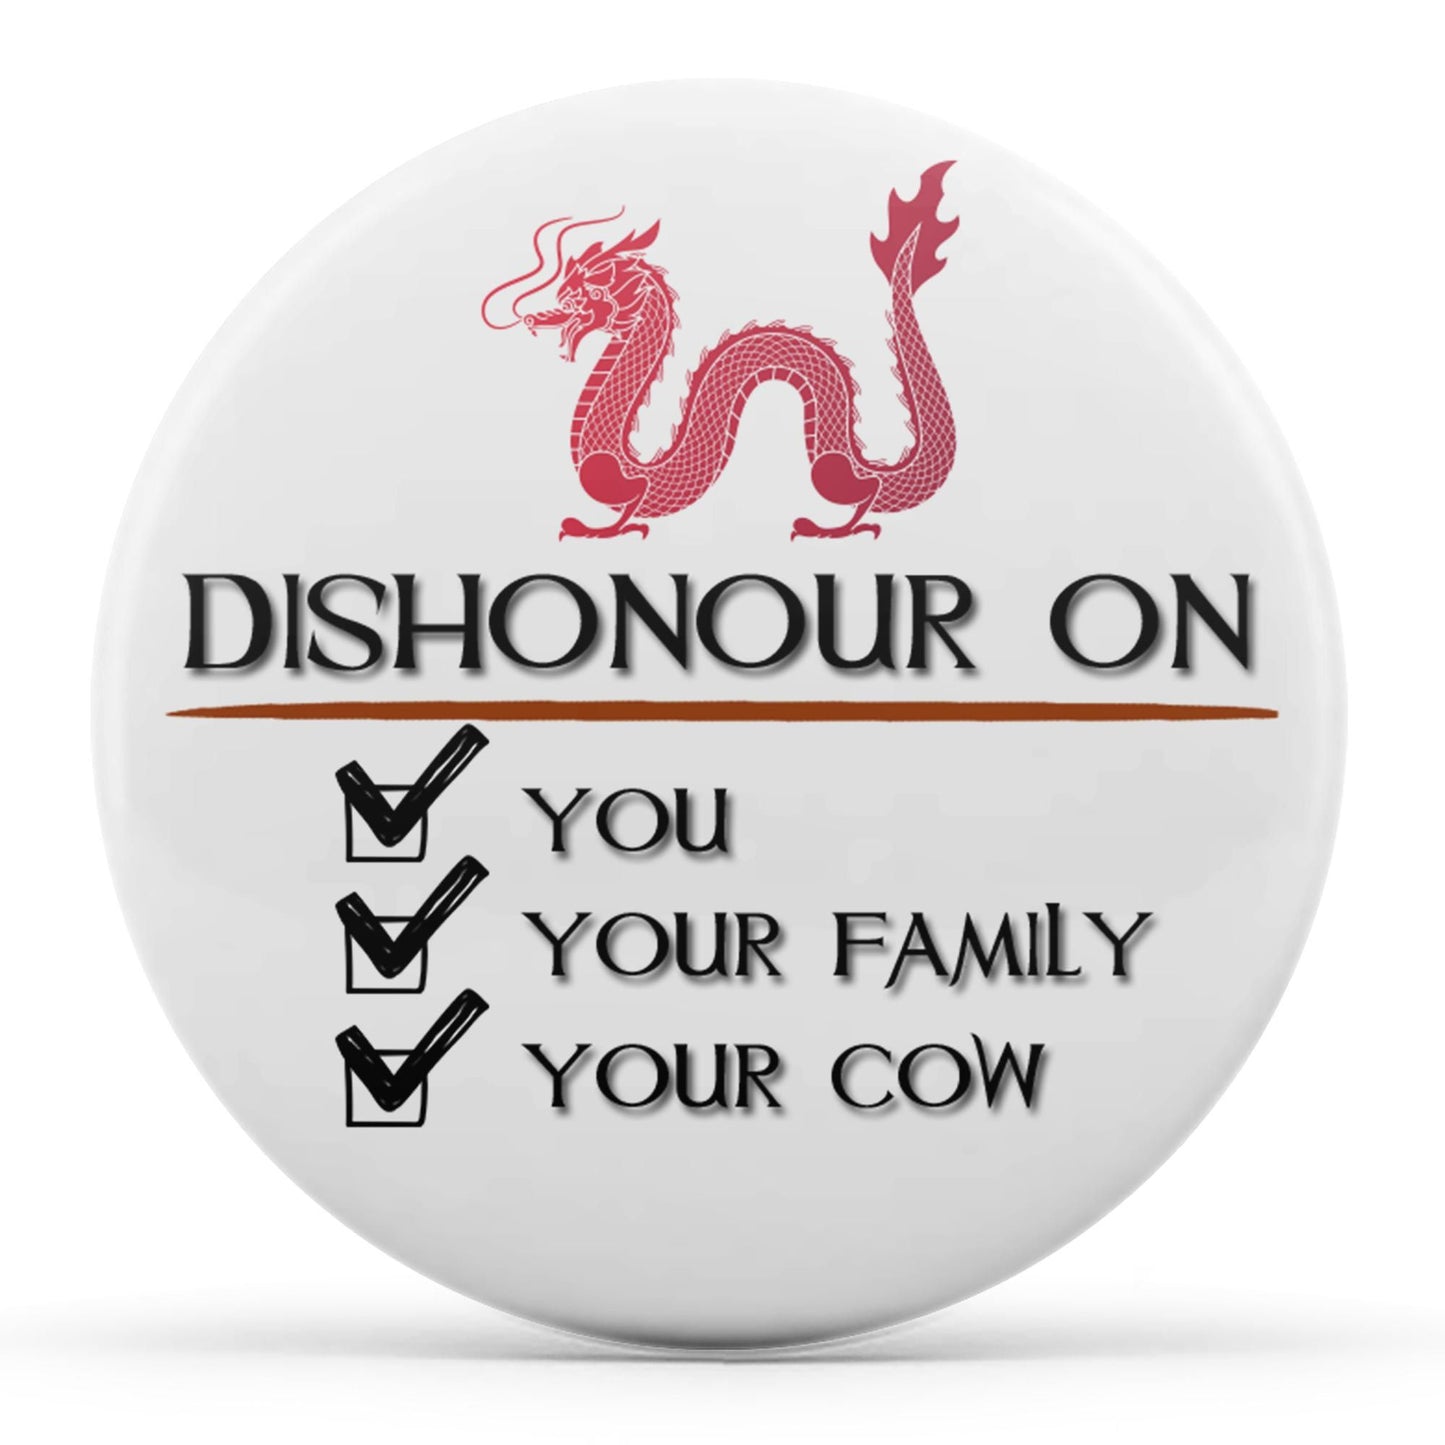 Dishonour On Your Cow... Image